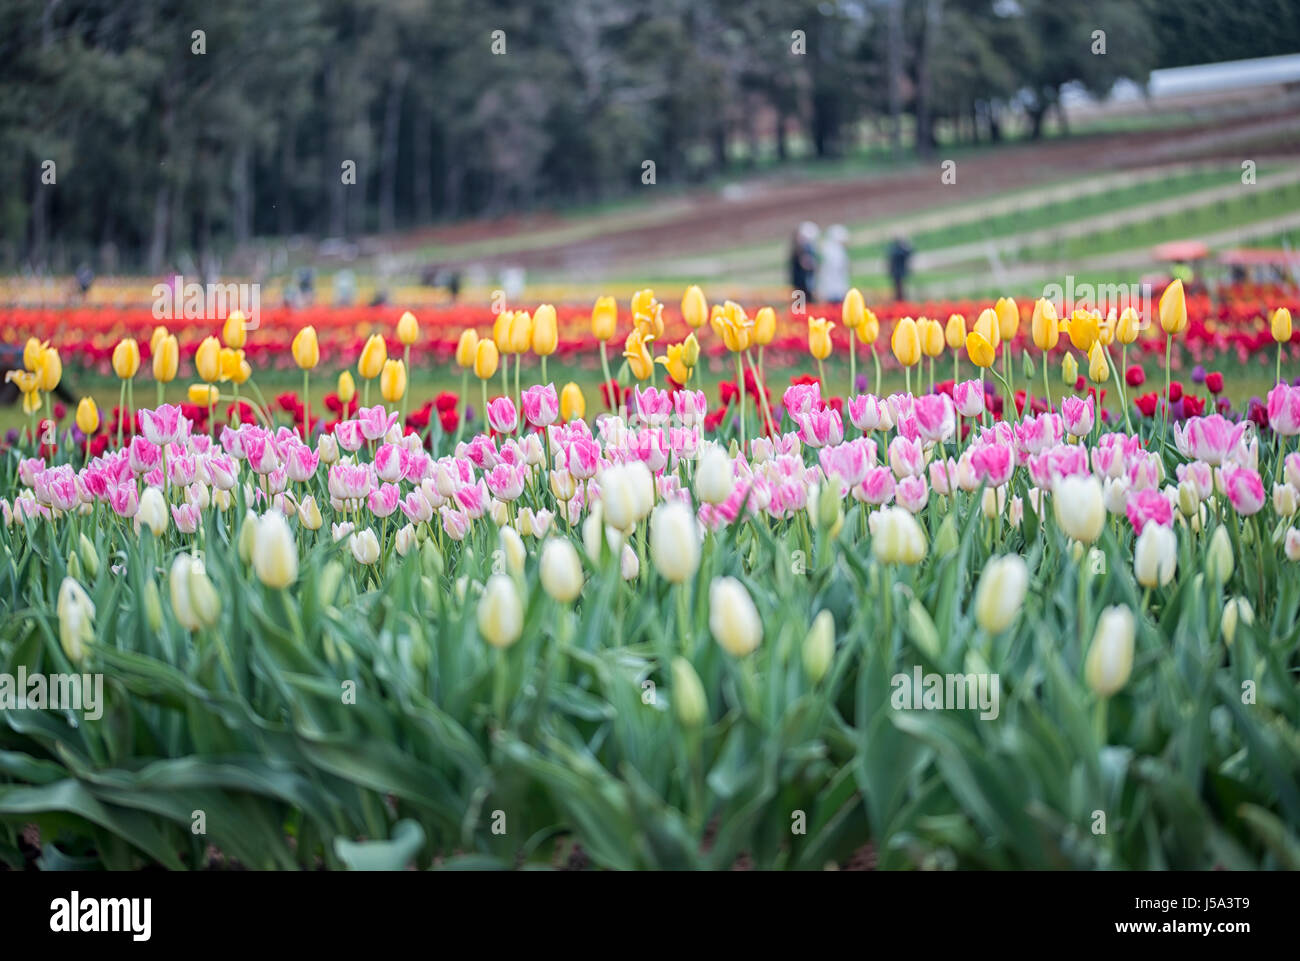 A bed of bright pink and white tulips blooming between bright green leaves with yellow colored tulips behind and bright red tulips in the background Stock Photo